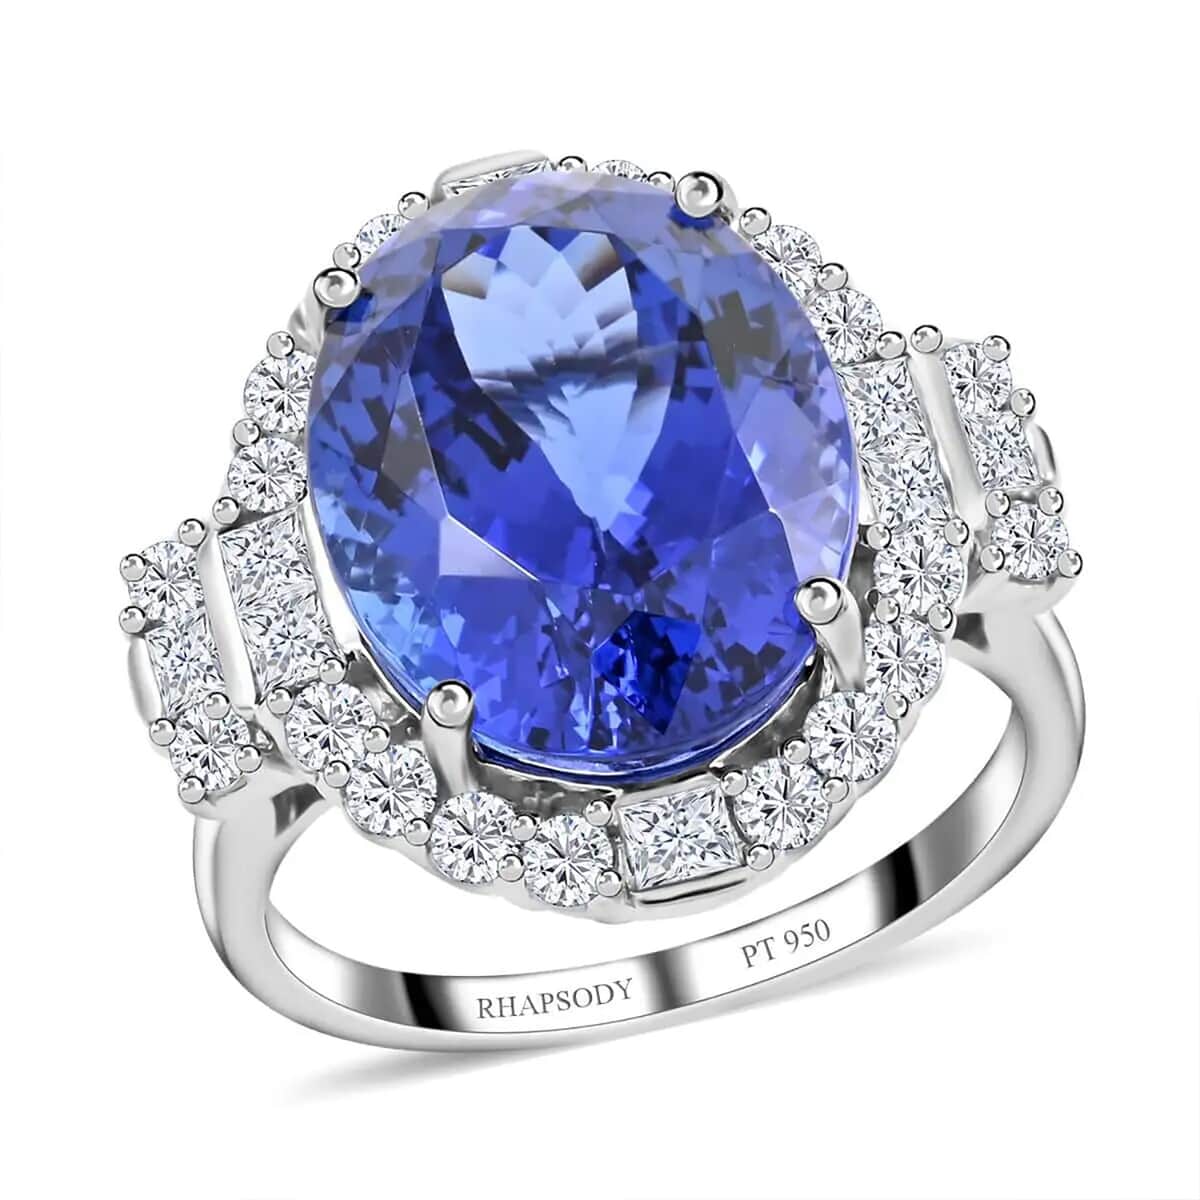 Certified & Appraised Rhapsody 950 Platinum AAAA Tanzanite, Diamond (E-F, VS) (1.24 cts) Halo Ring (Size 6.0) (9.35 g) 10.75 ctw image number 0